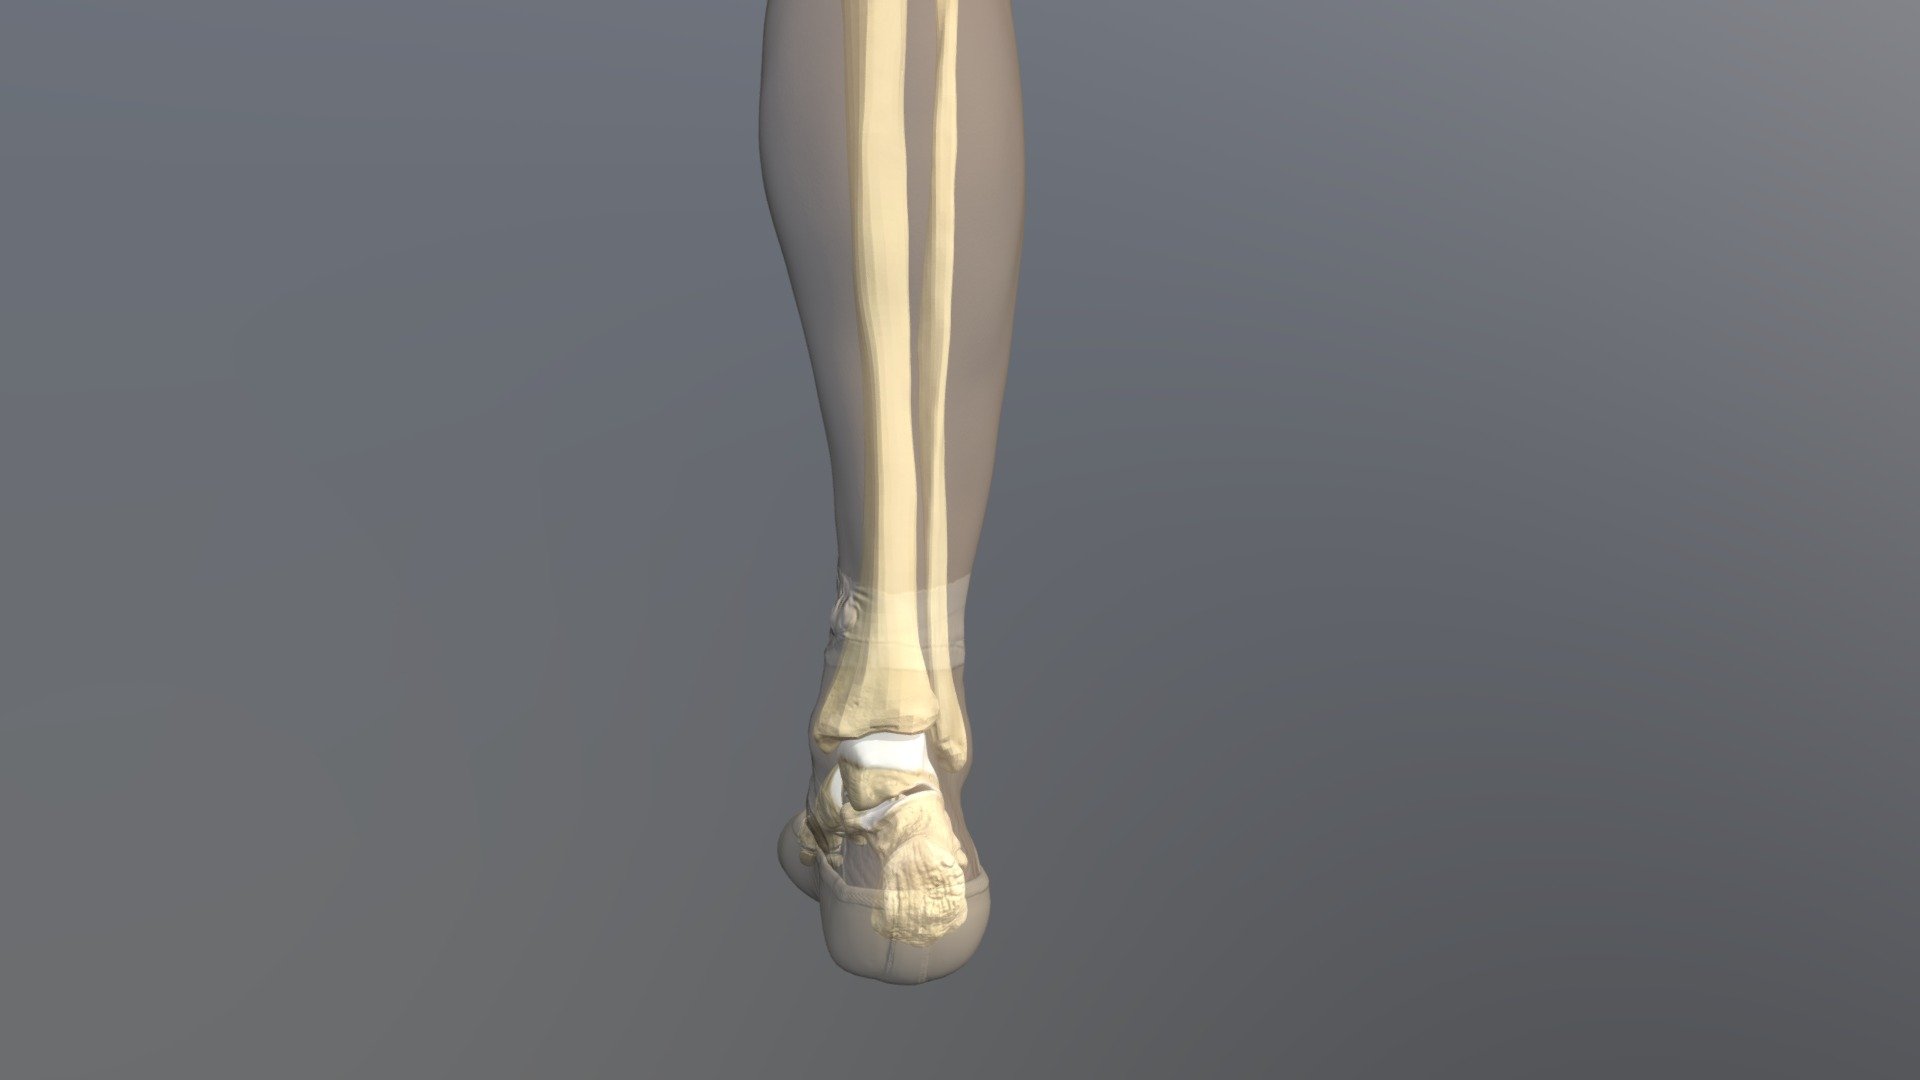 Supination And Pronation 3d Model By Enpointemaet Dancersenpointe 2bbc475 Sketchfab 3213